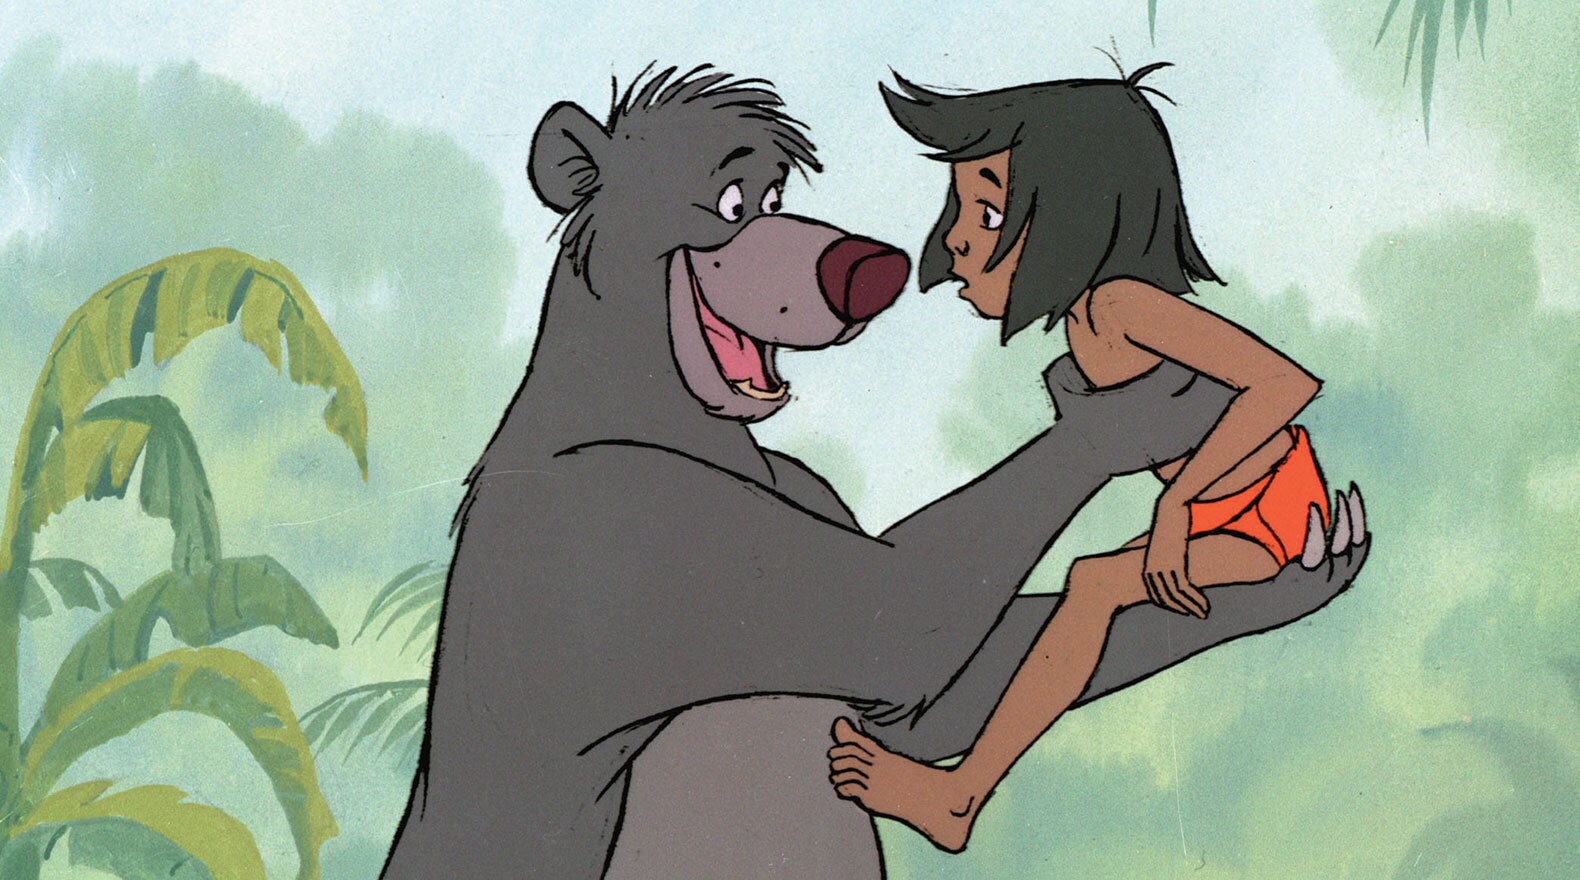 "You need help, and ol' Baloo's gonna learn you how to fight like a bear."